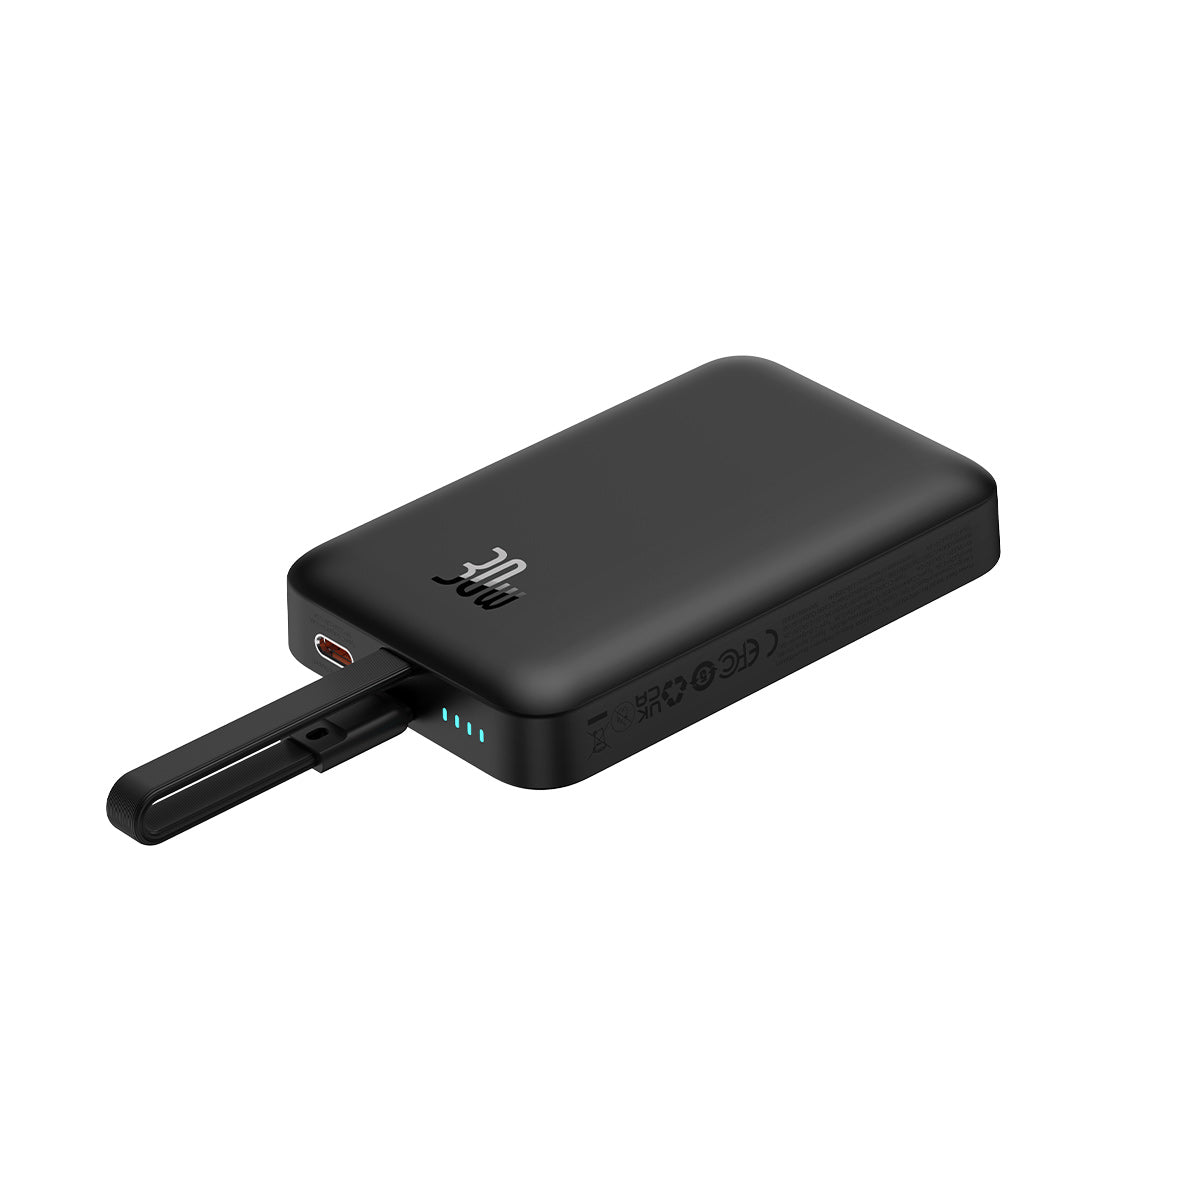 Baseus Magnetic Power Bank 30W 10000mAh With Built-in USB-C Cable Black